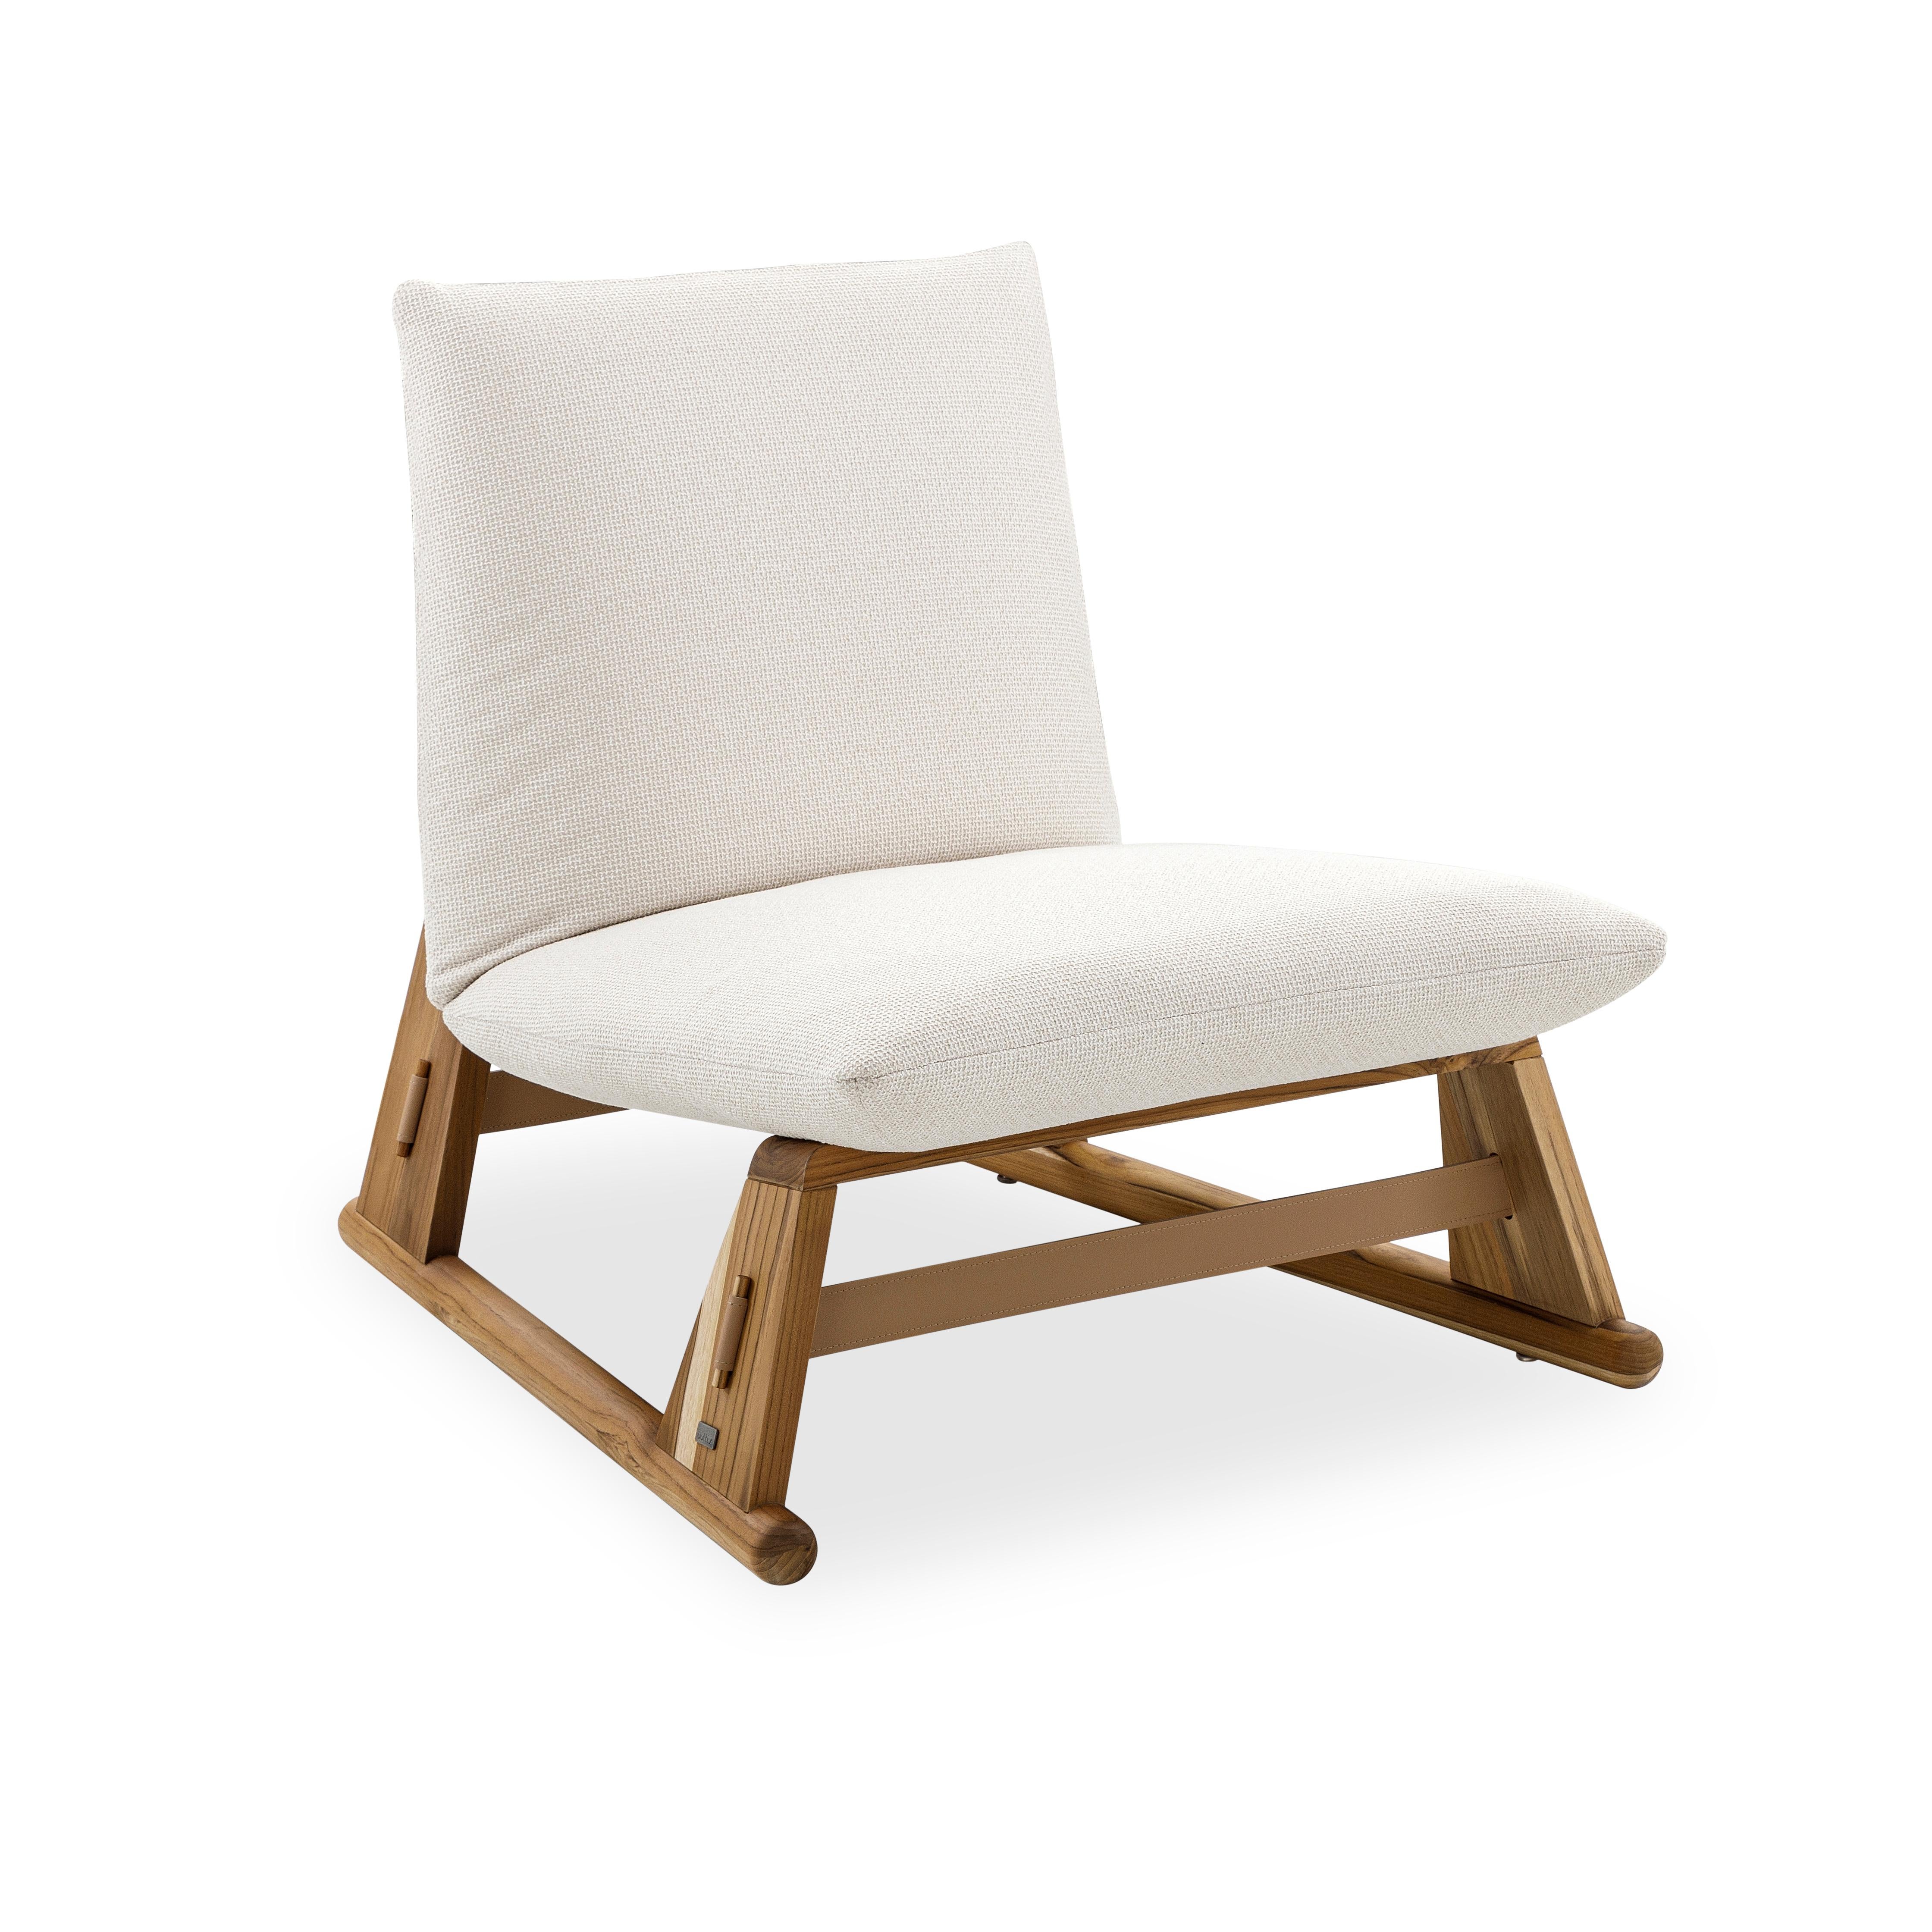 Contemporary Maia Chair in Teak Wood Finish and White Fabric For Sale 2